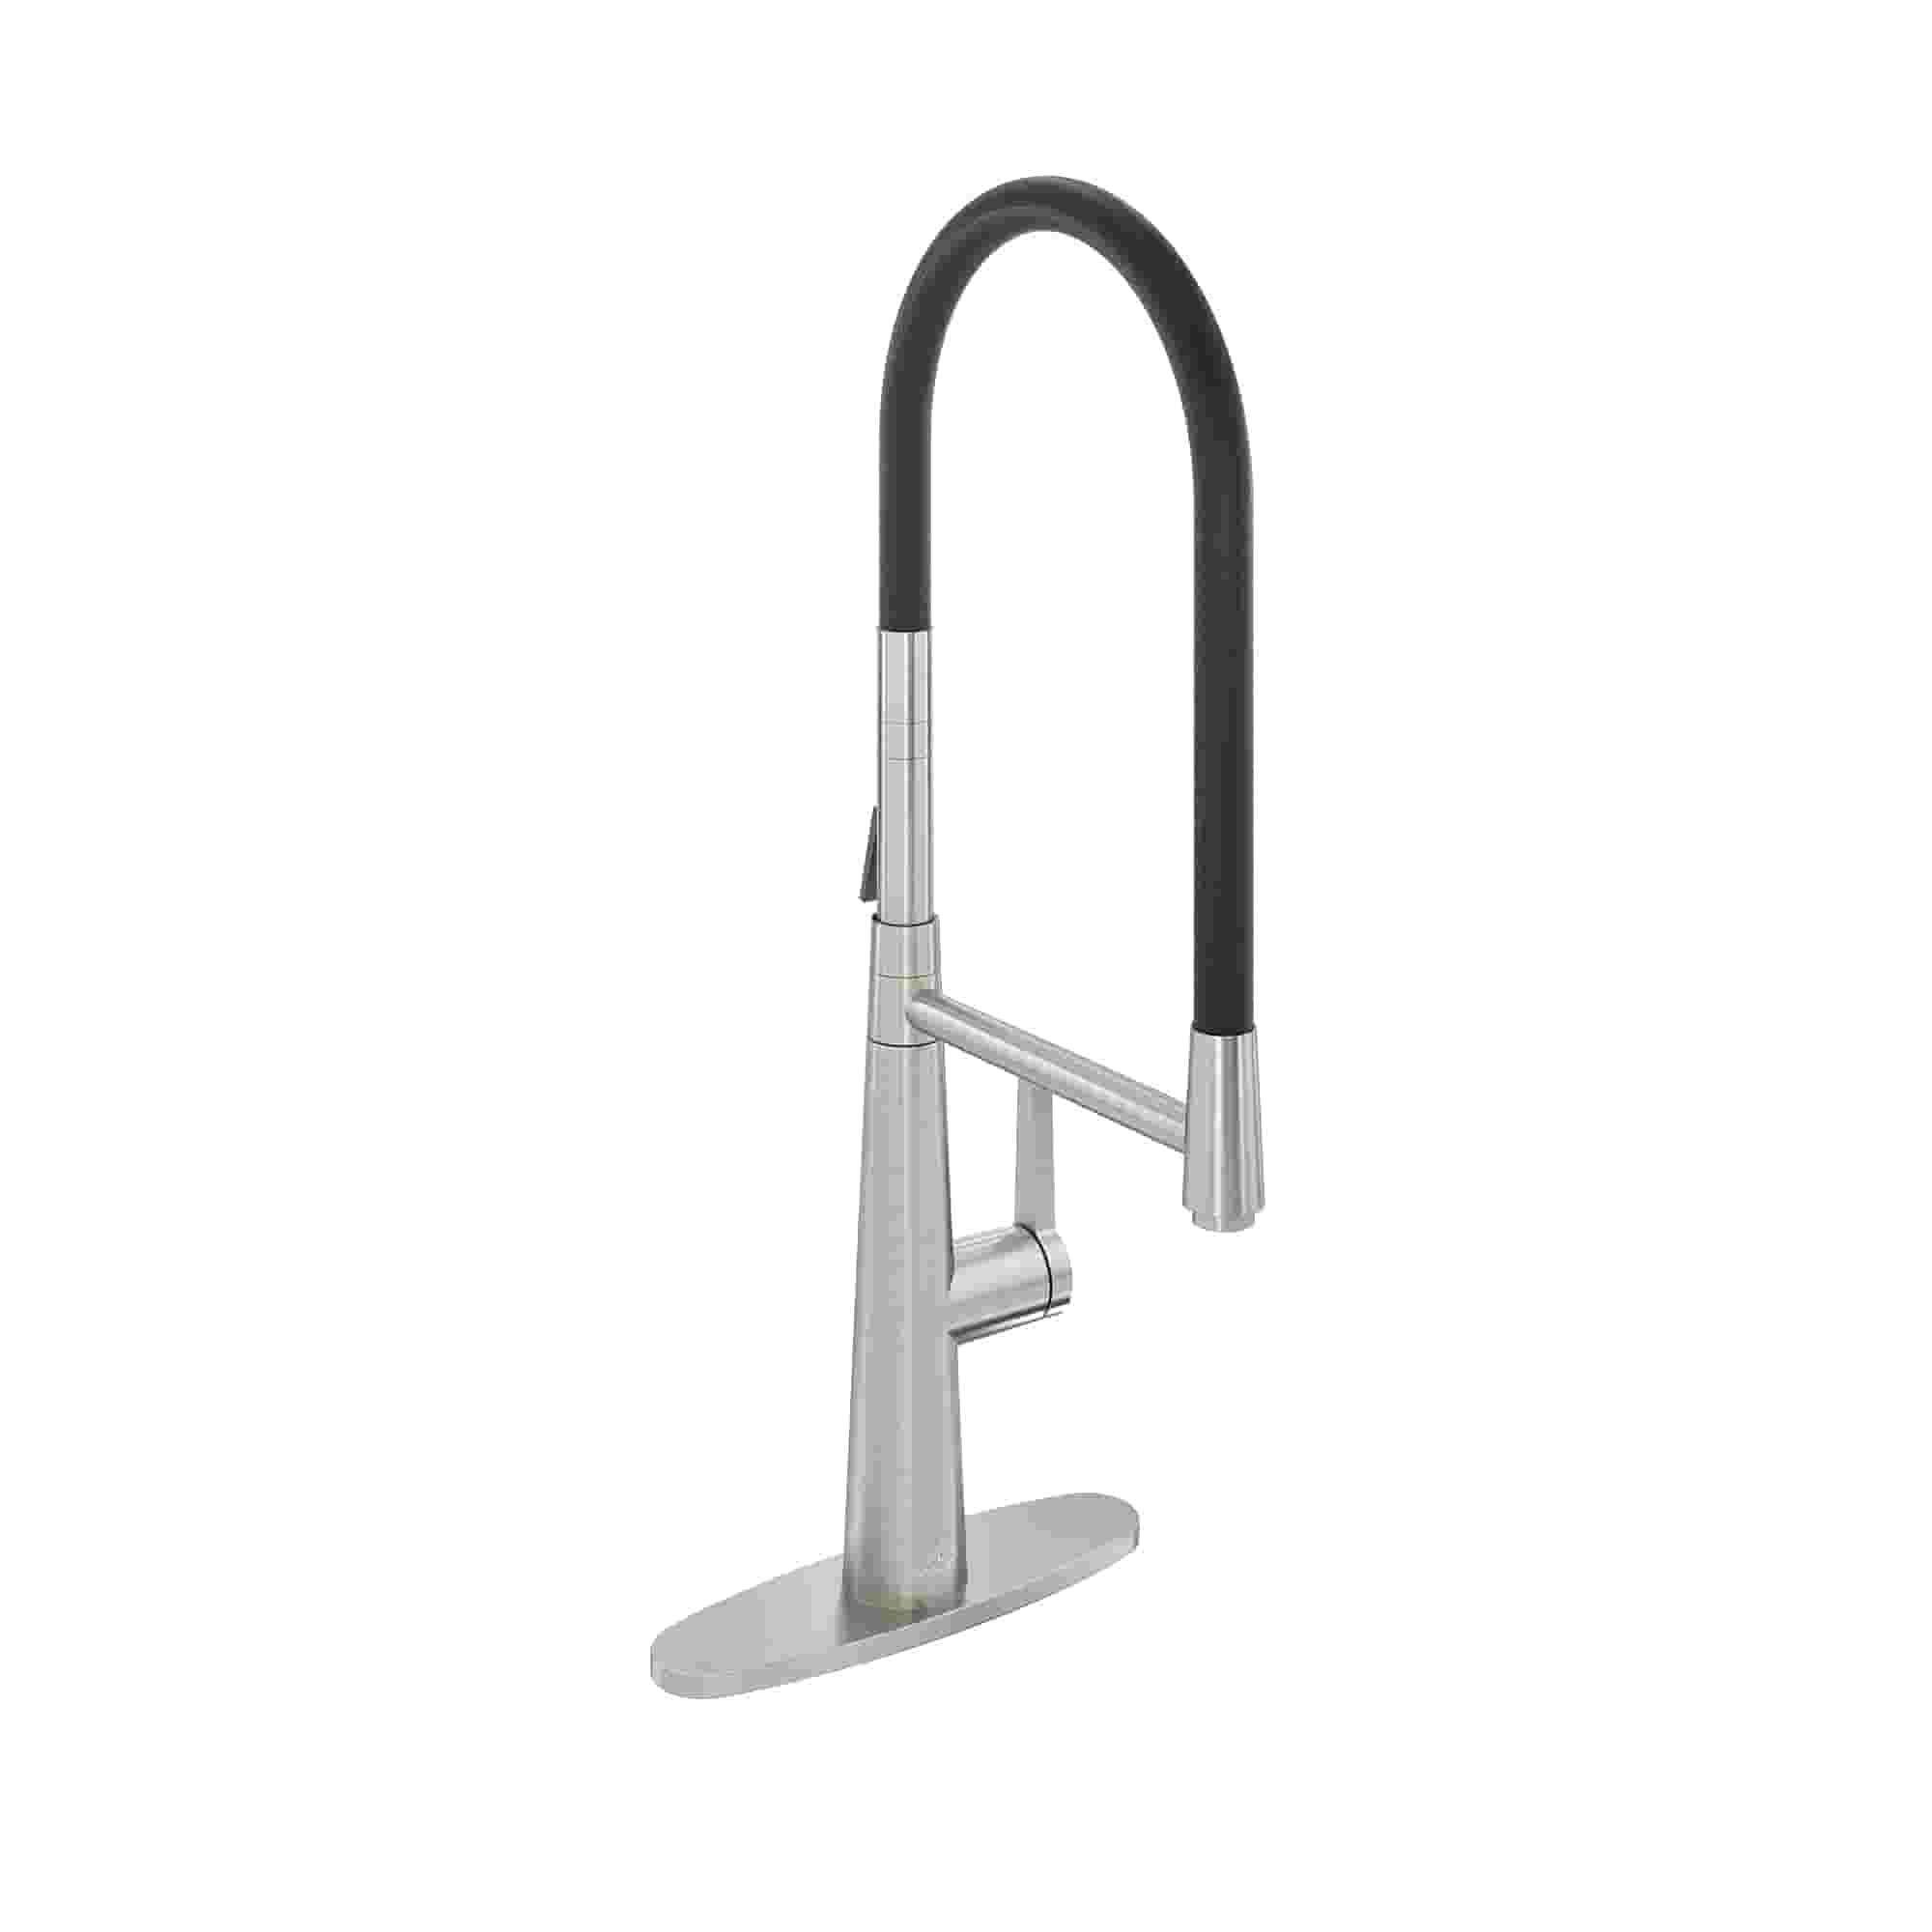 CASAINC 1.8GPM Silicone Kitchen Faucet in Brushed Nickel and More